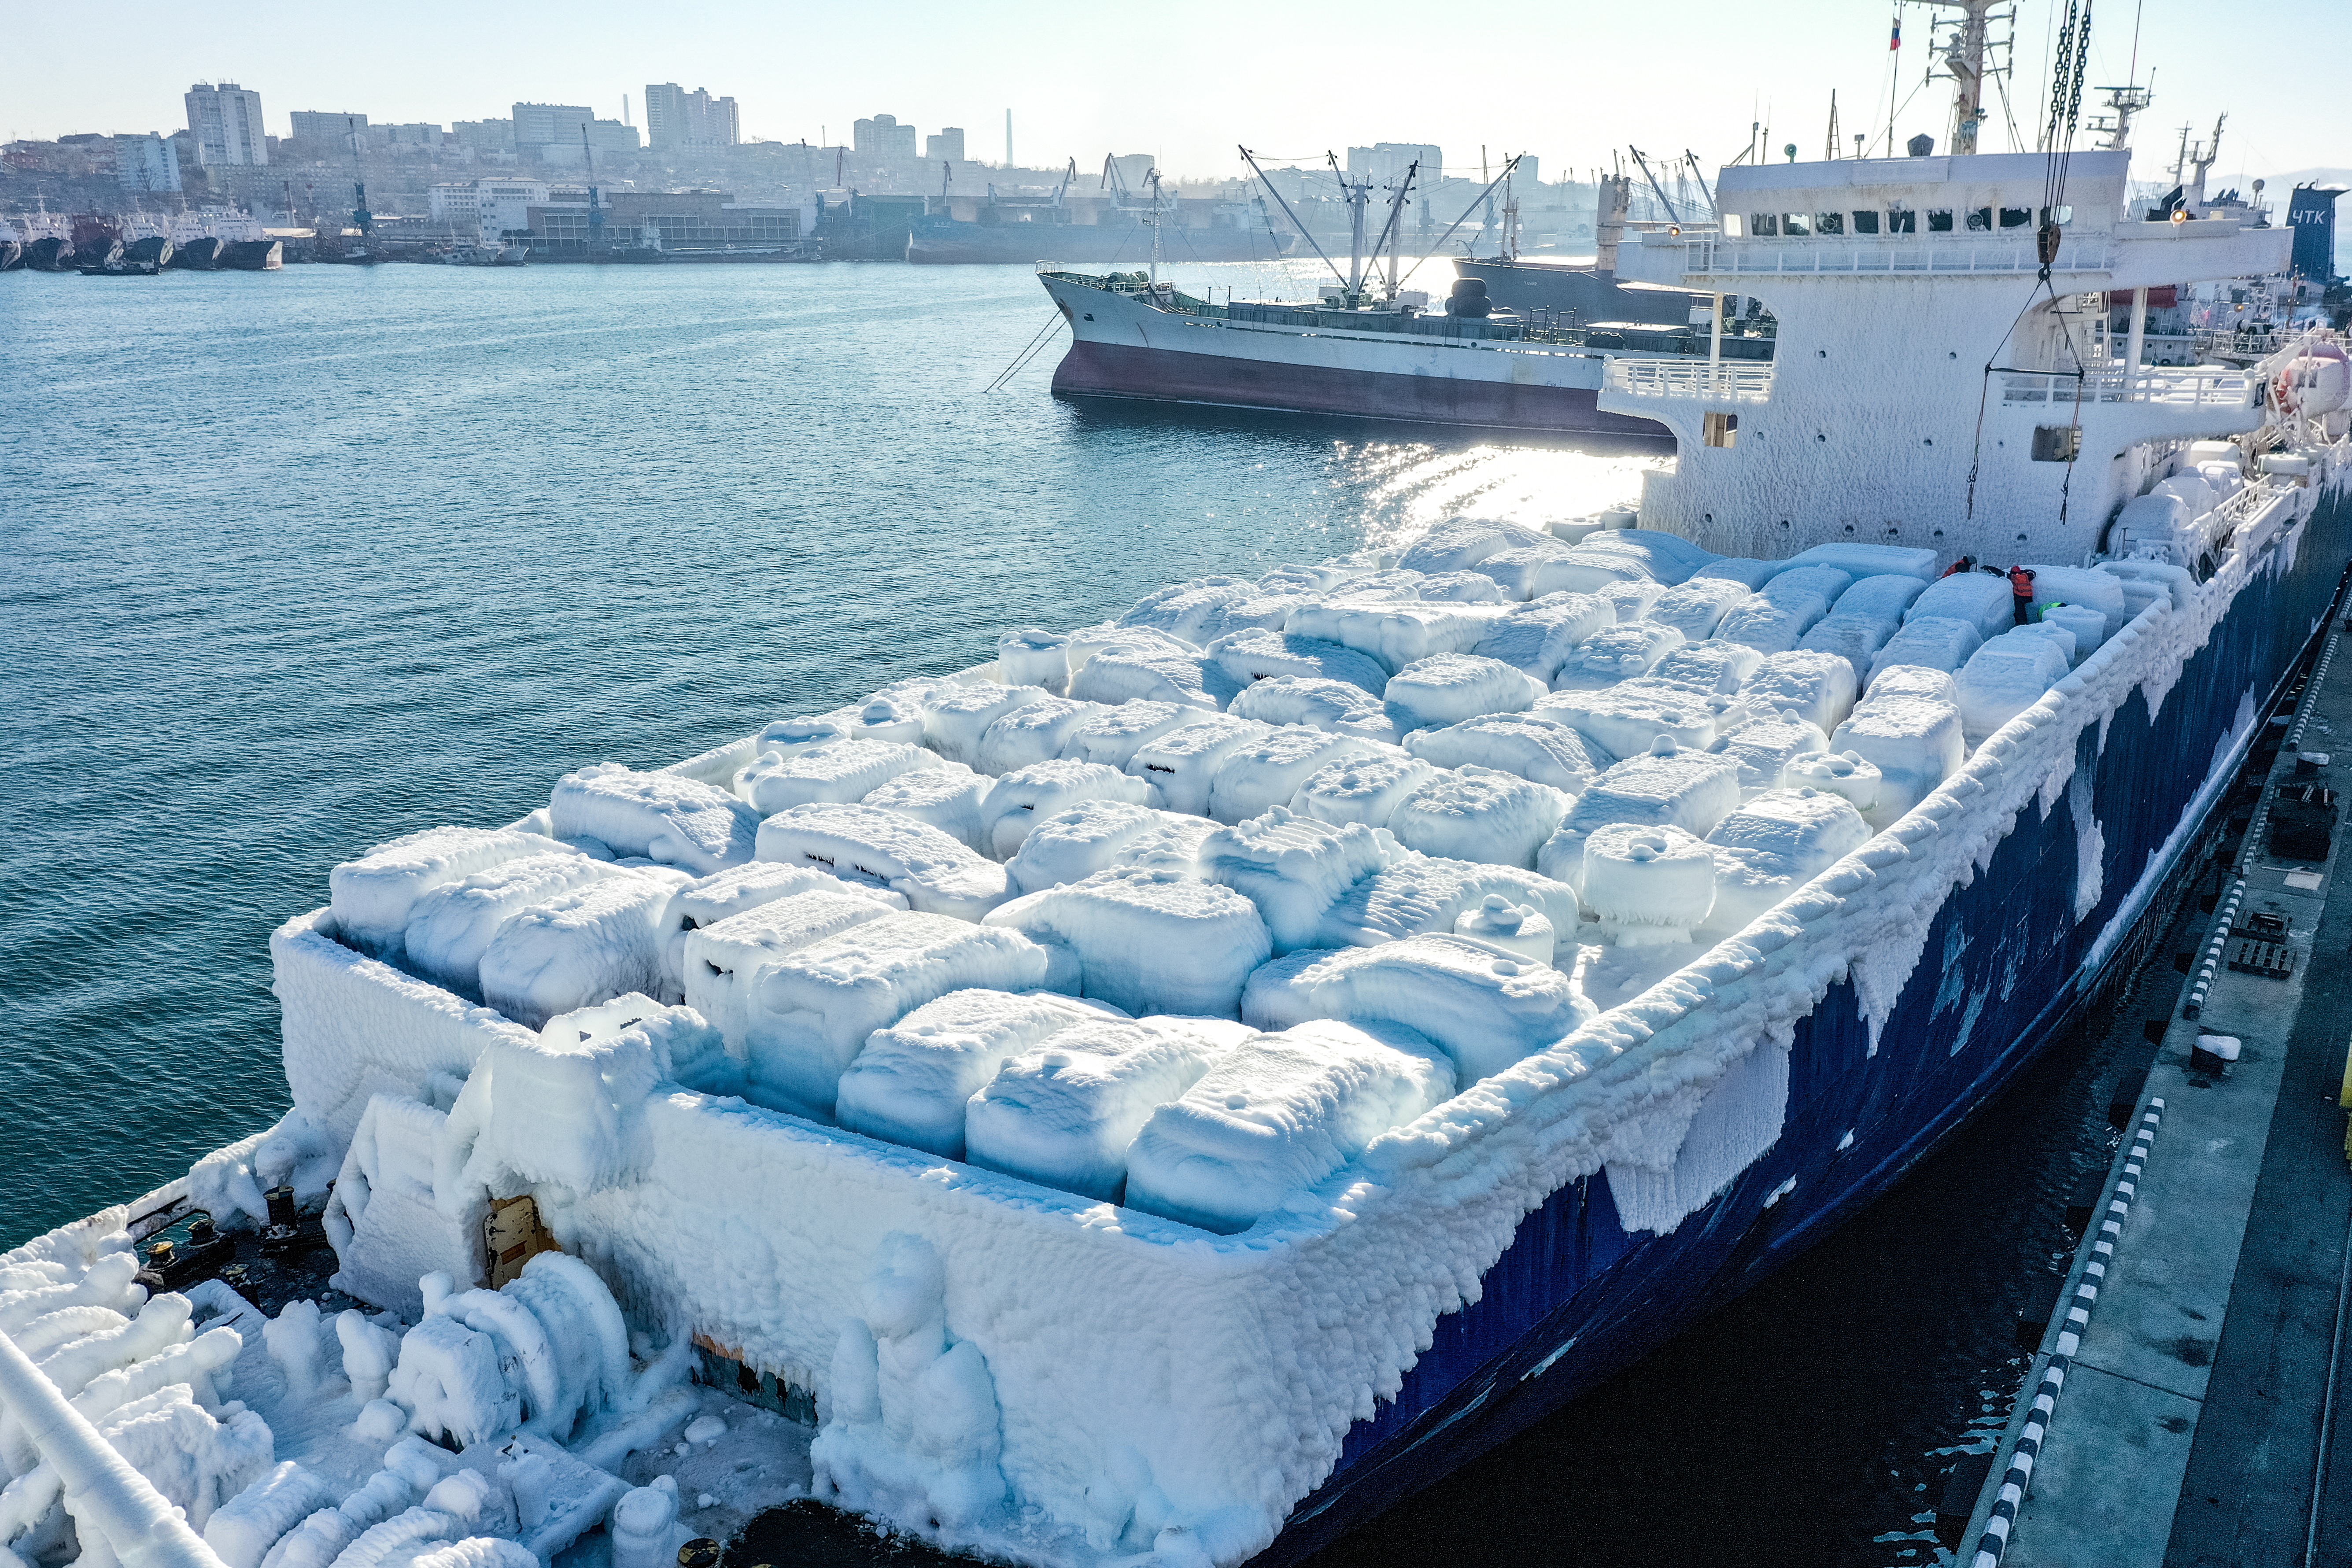 VLADIVOSTOK, RUSSIA  DECEMBER 28, 2021: A view of an ice-covered Sun Rio cargo ship carrying second hand cars from Japan in the port of Vladivostok. Ship icing occurs due to a humid sea wind, waves and sub-zero air temperatures which leads to an increase in draft, heeling and can increase the risk of a ship's overturn. Yuri Smityuk/TASS (Photo by Yuri Smityuk\TASS via Getty Images)